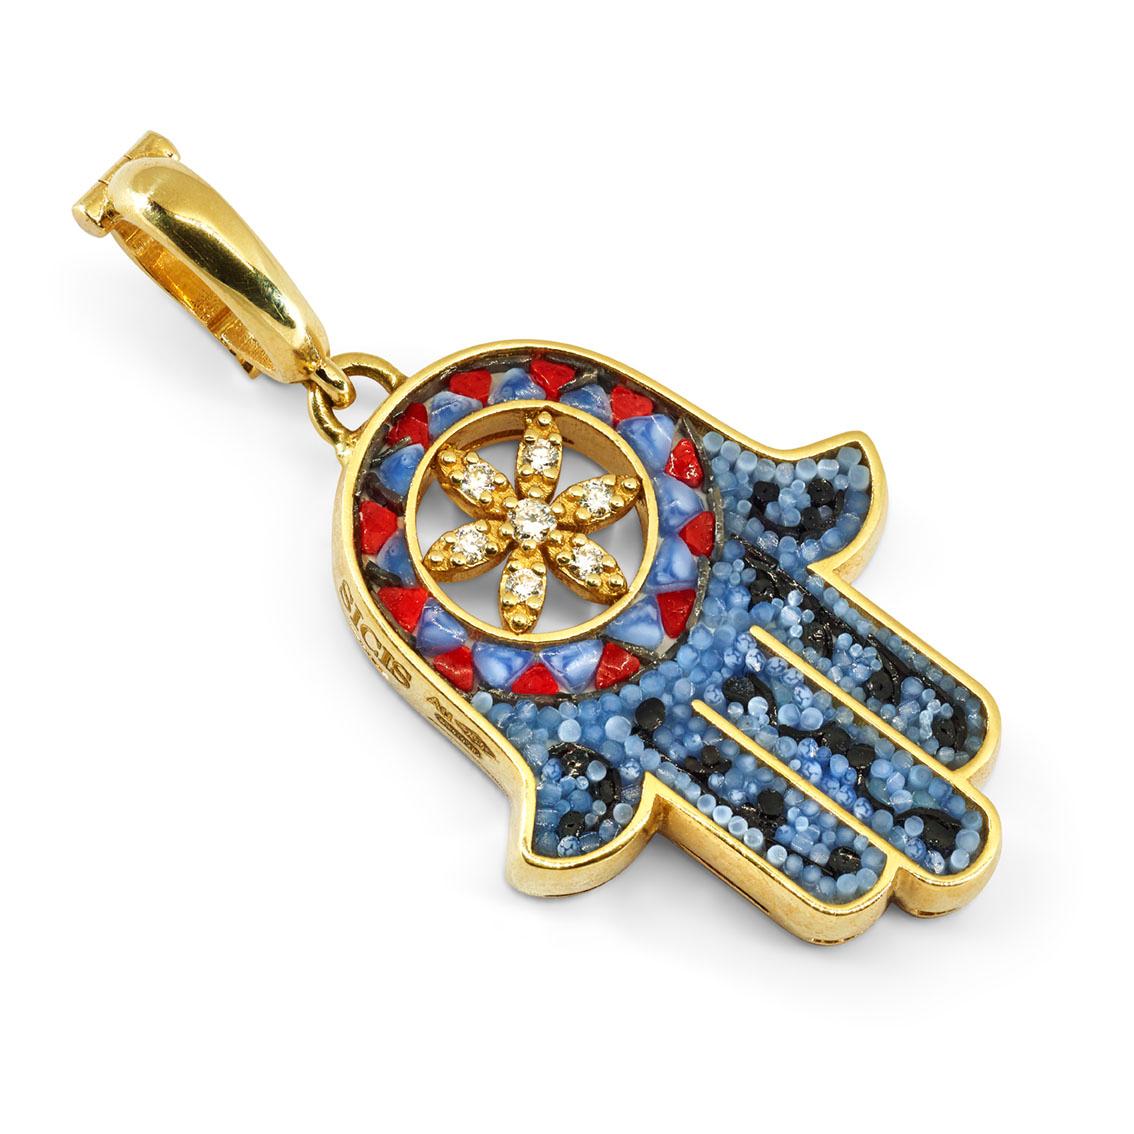 Brilliant Cut Stylish Pendant Yellow Gold White Diamonds Hand Decorated with Micro Mosaic For Sale